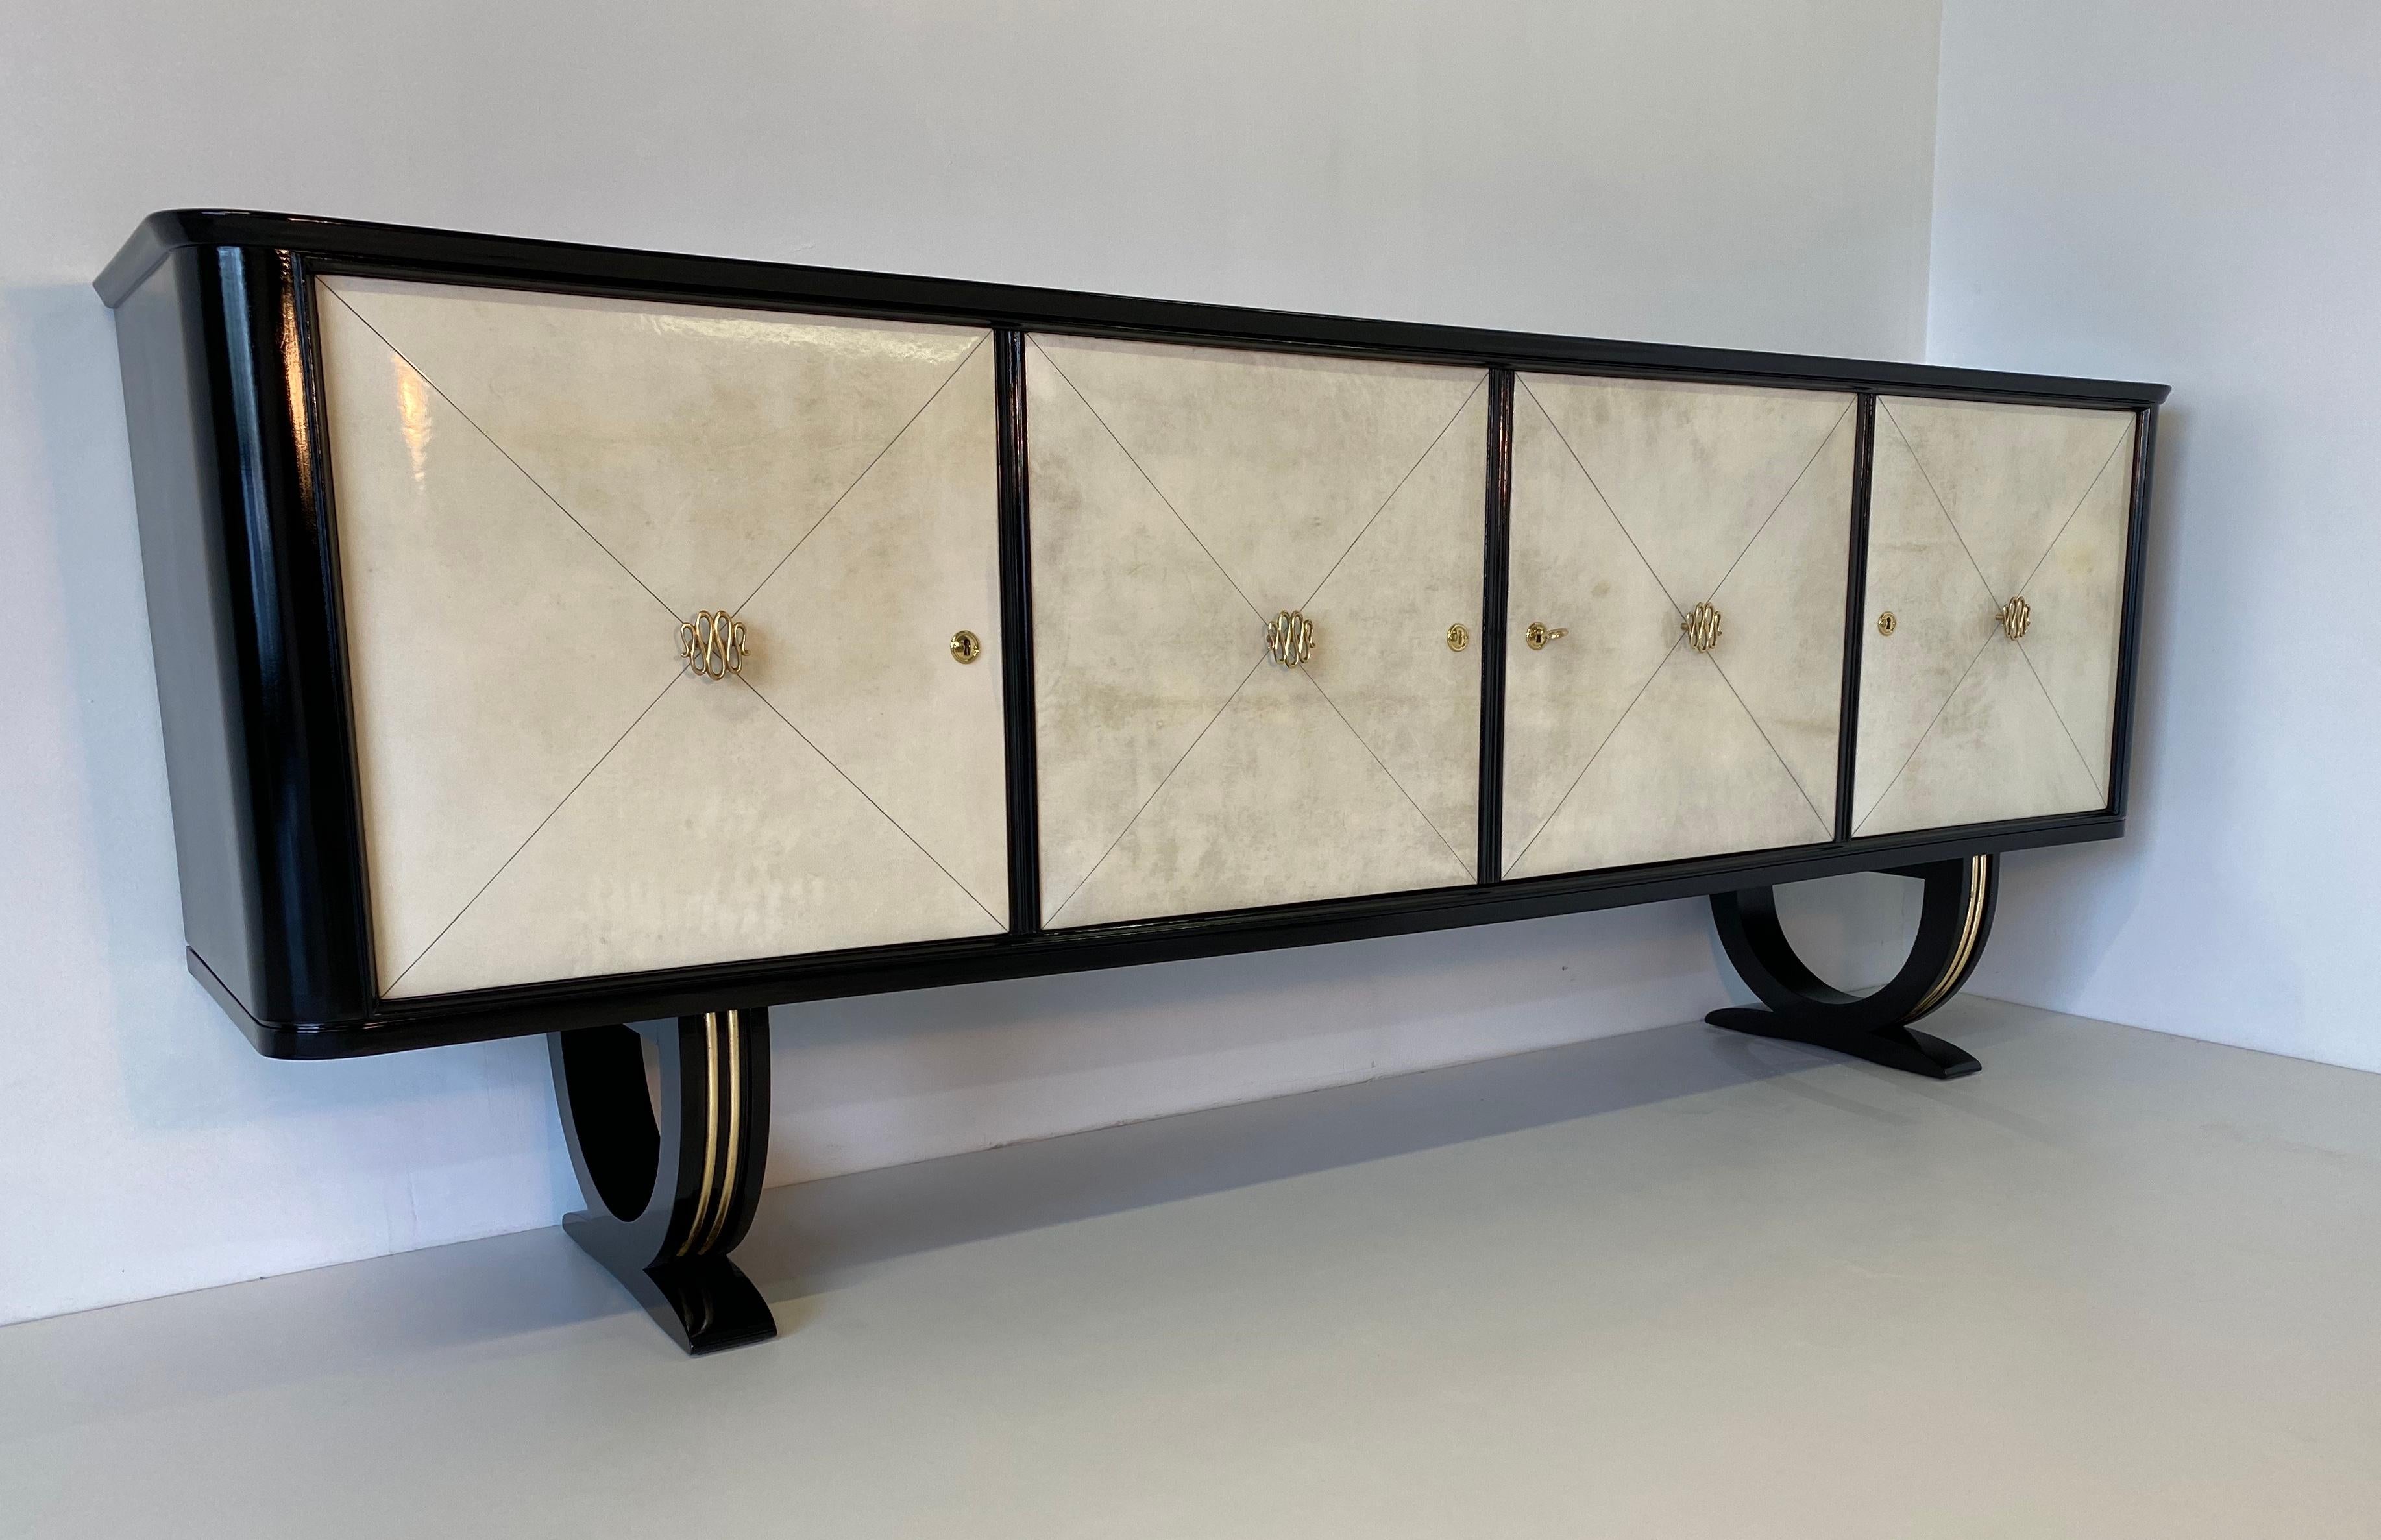 This sideboard was produced in the 1940s in Italy.
The structure is black lacquered while the doors are covered in parchment. 
The details on the base are in gold leaf and the elegant handles are in brass.
Completely restored.